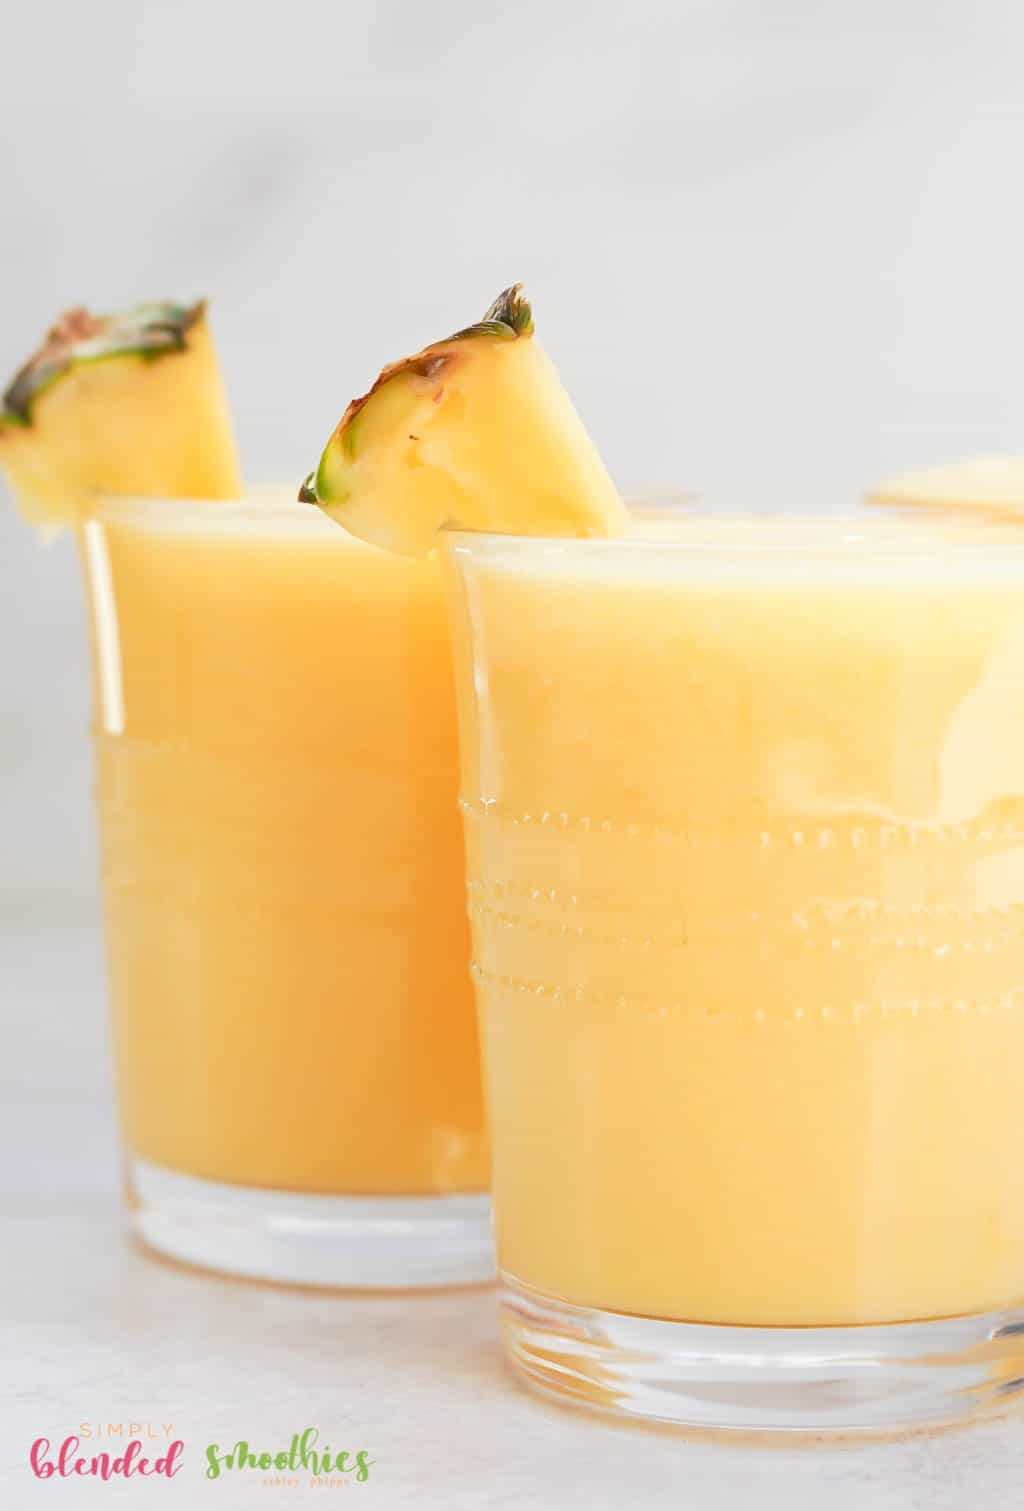 Delicious And Easy To Make Dairy-Free Pineapple Smoothie With Peaches